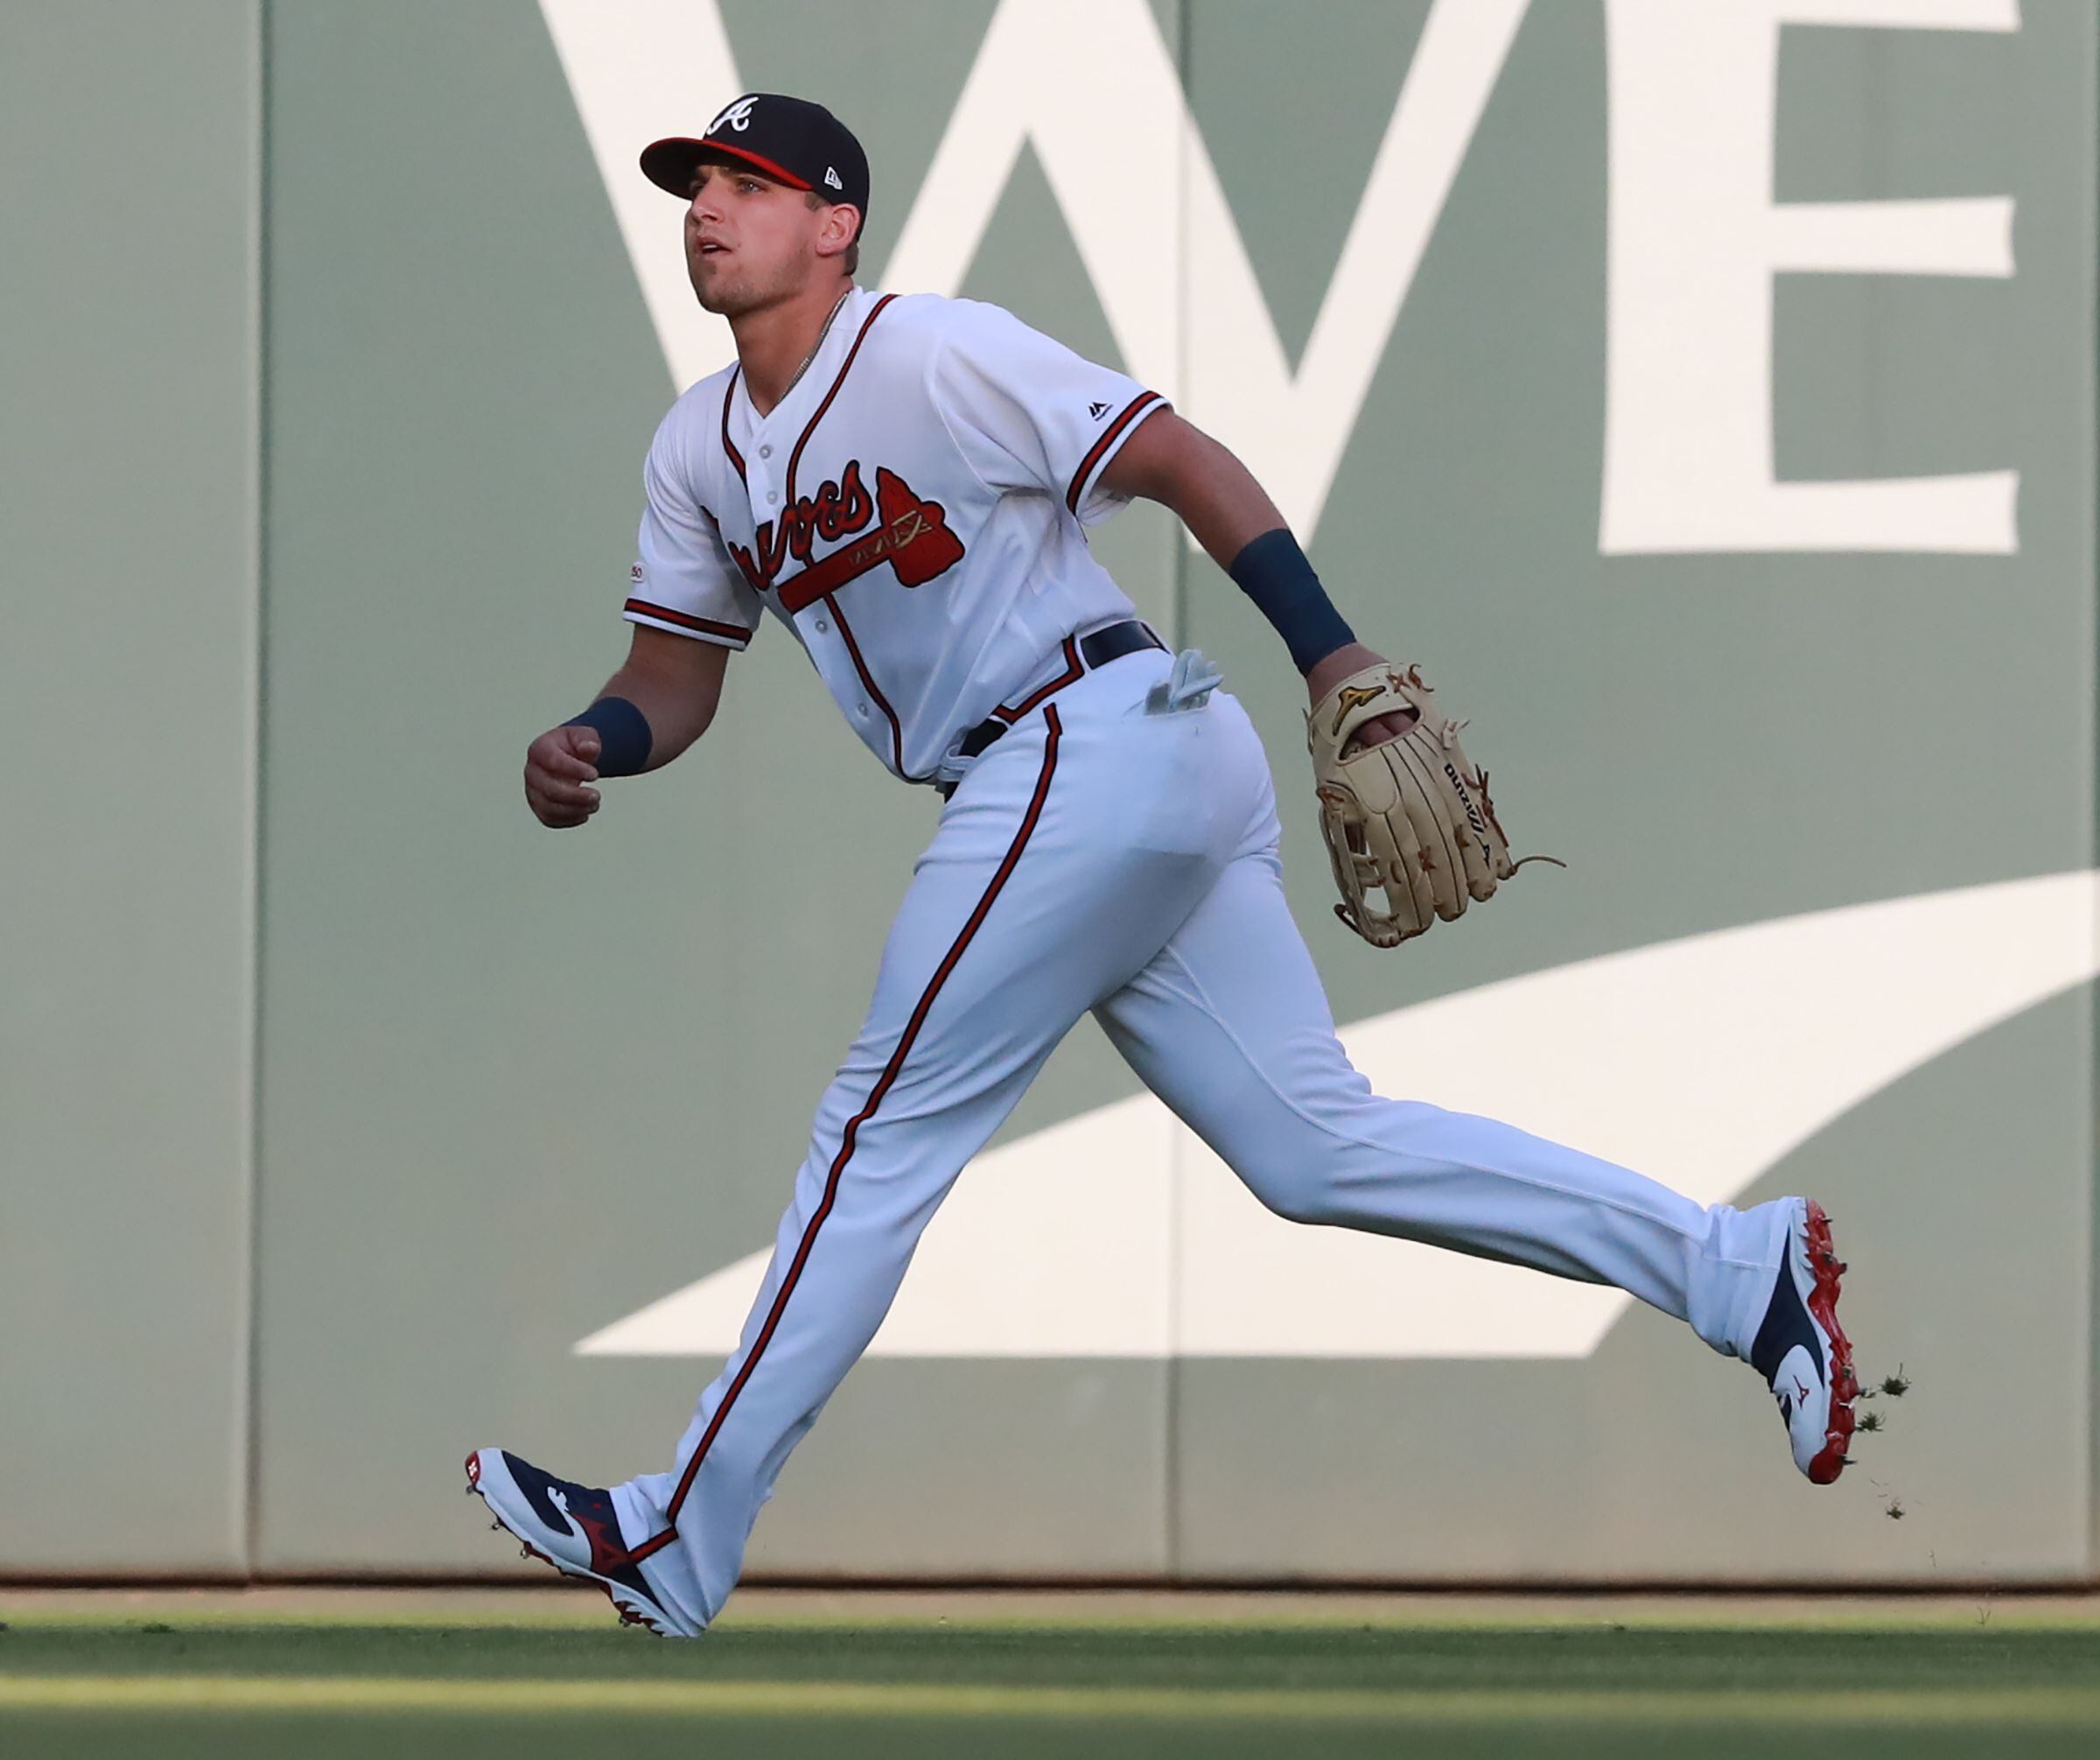 Chipper Jones on Austin Riley: I don't think he's hit his ceiling yet